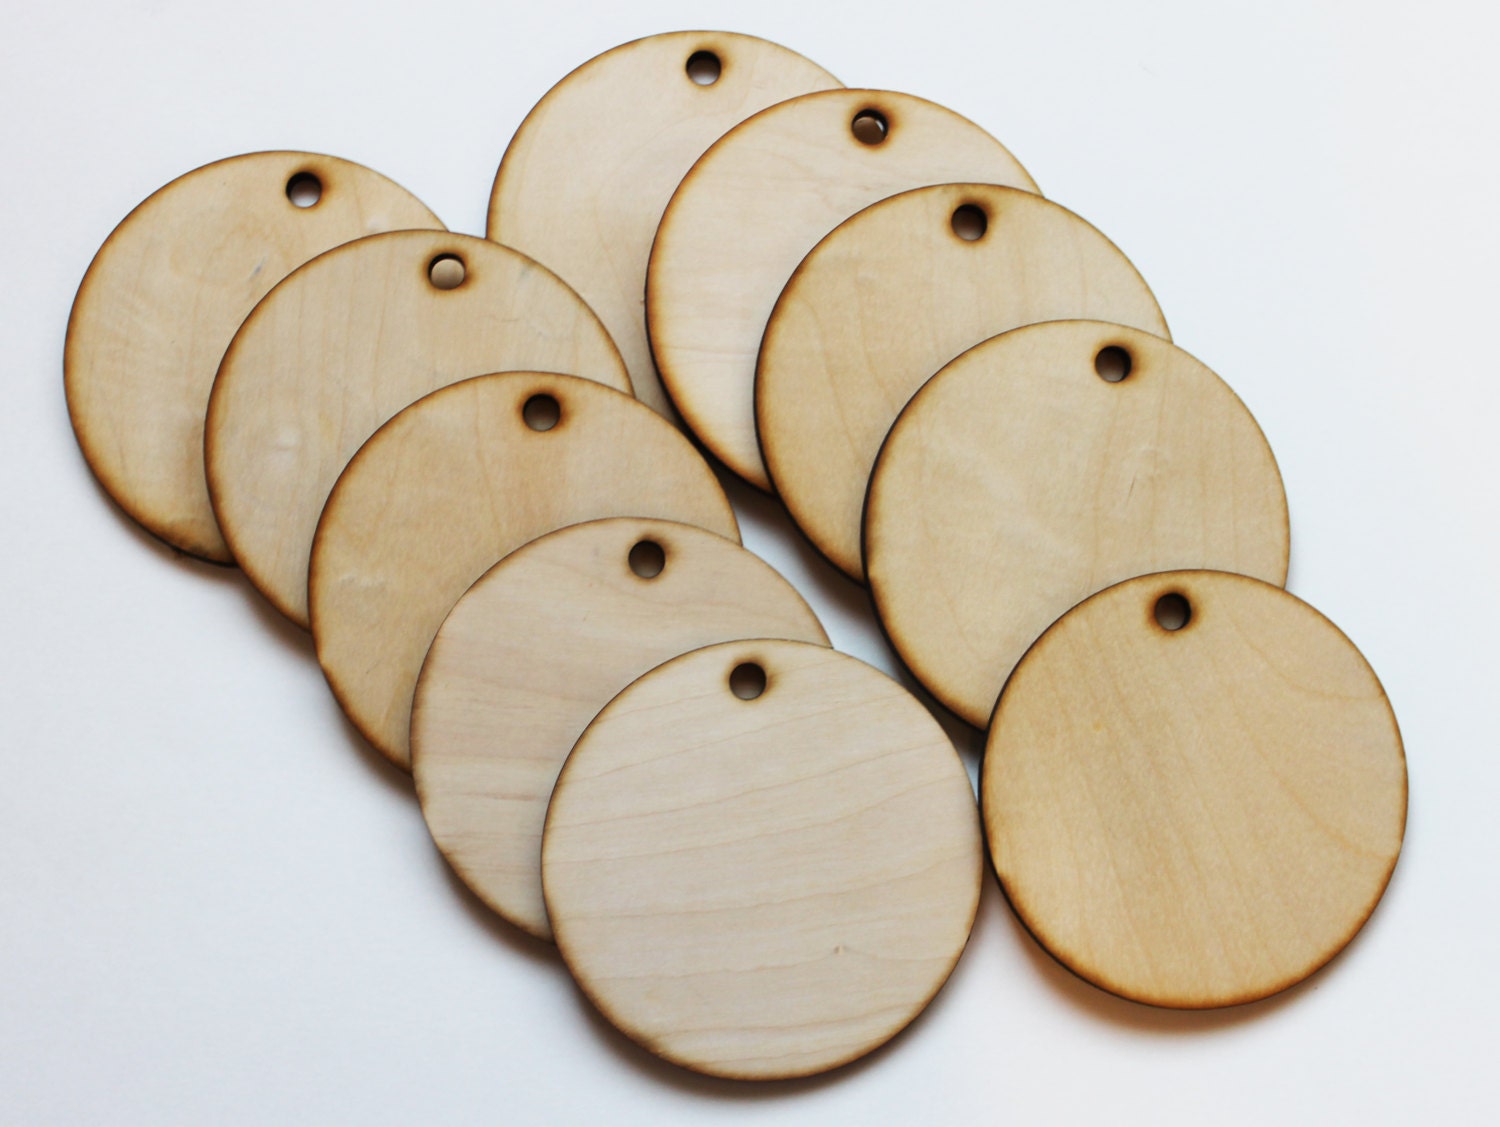 20 Lot Unfinished Wood Circles for Crafts 2 Inch Round Wooden Cutouts for  DIY